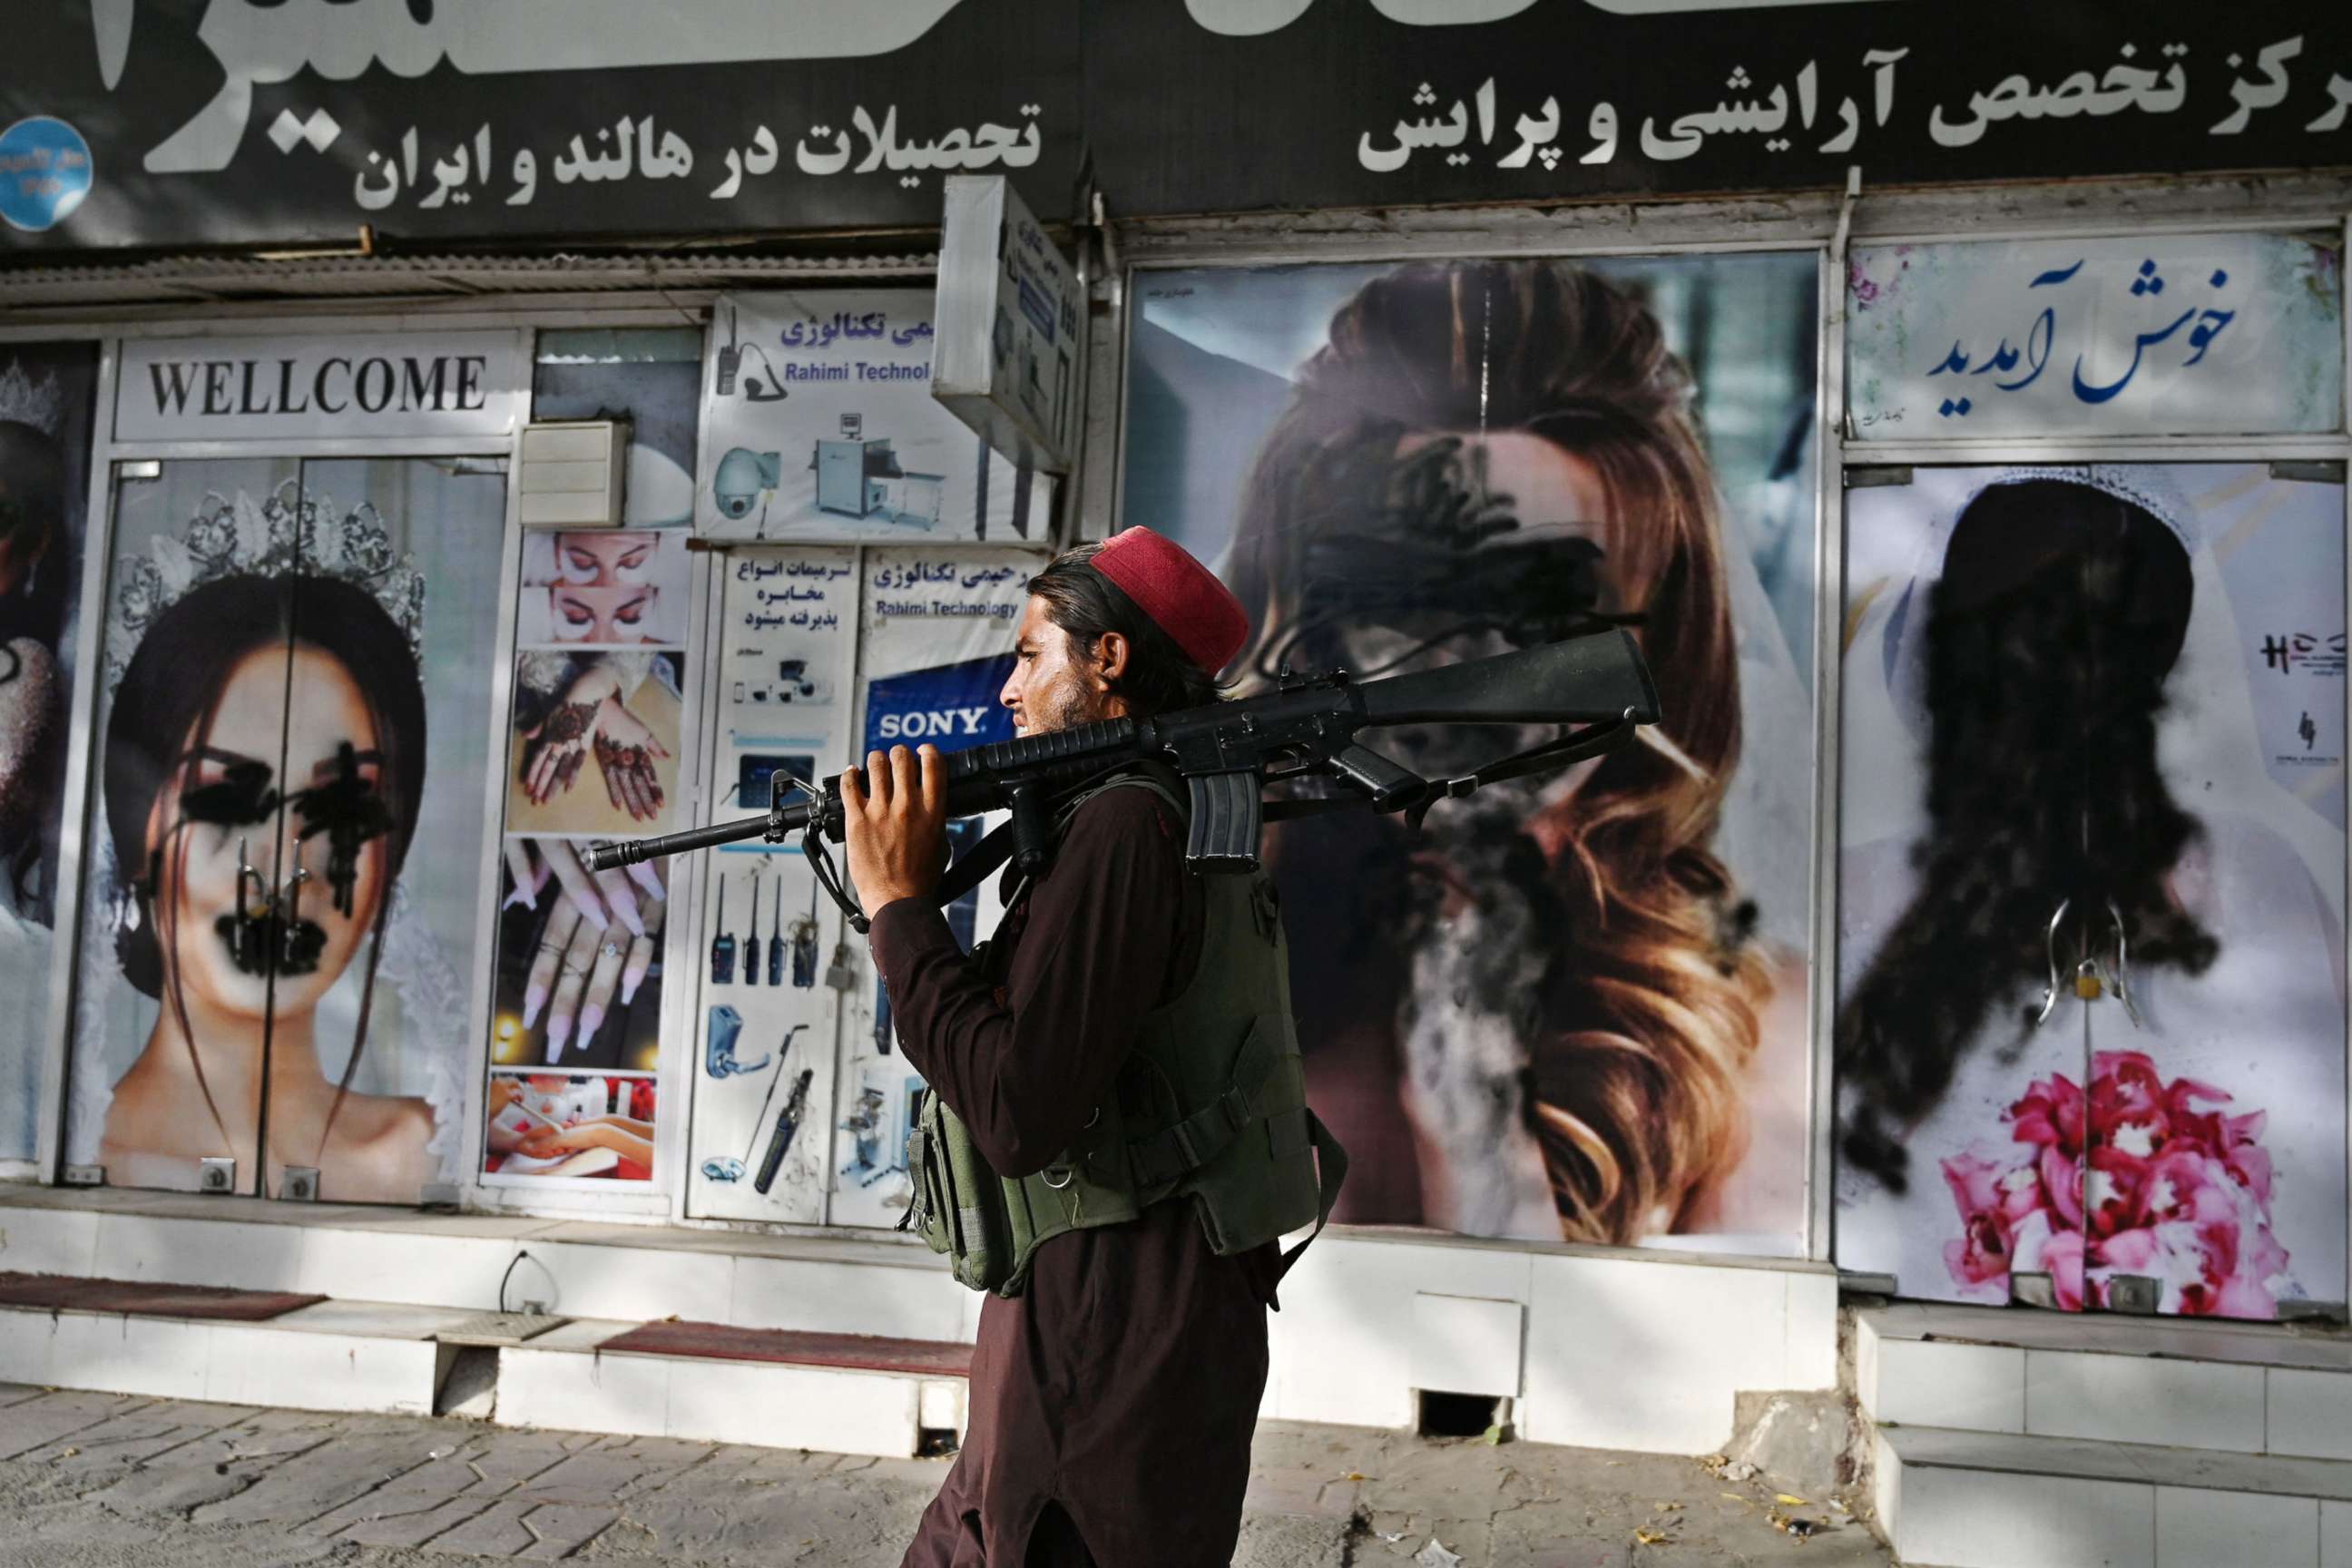 PHOTO: A Taliban fighter walks past a beauty salon with images of women defaced using a spray paint in Shar-e-Naw in Kabul, Afghanistan, Aug. 18, 2021.